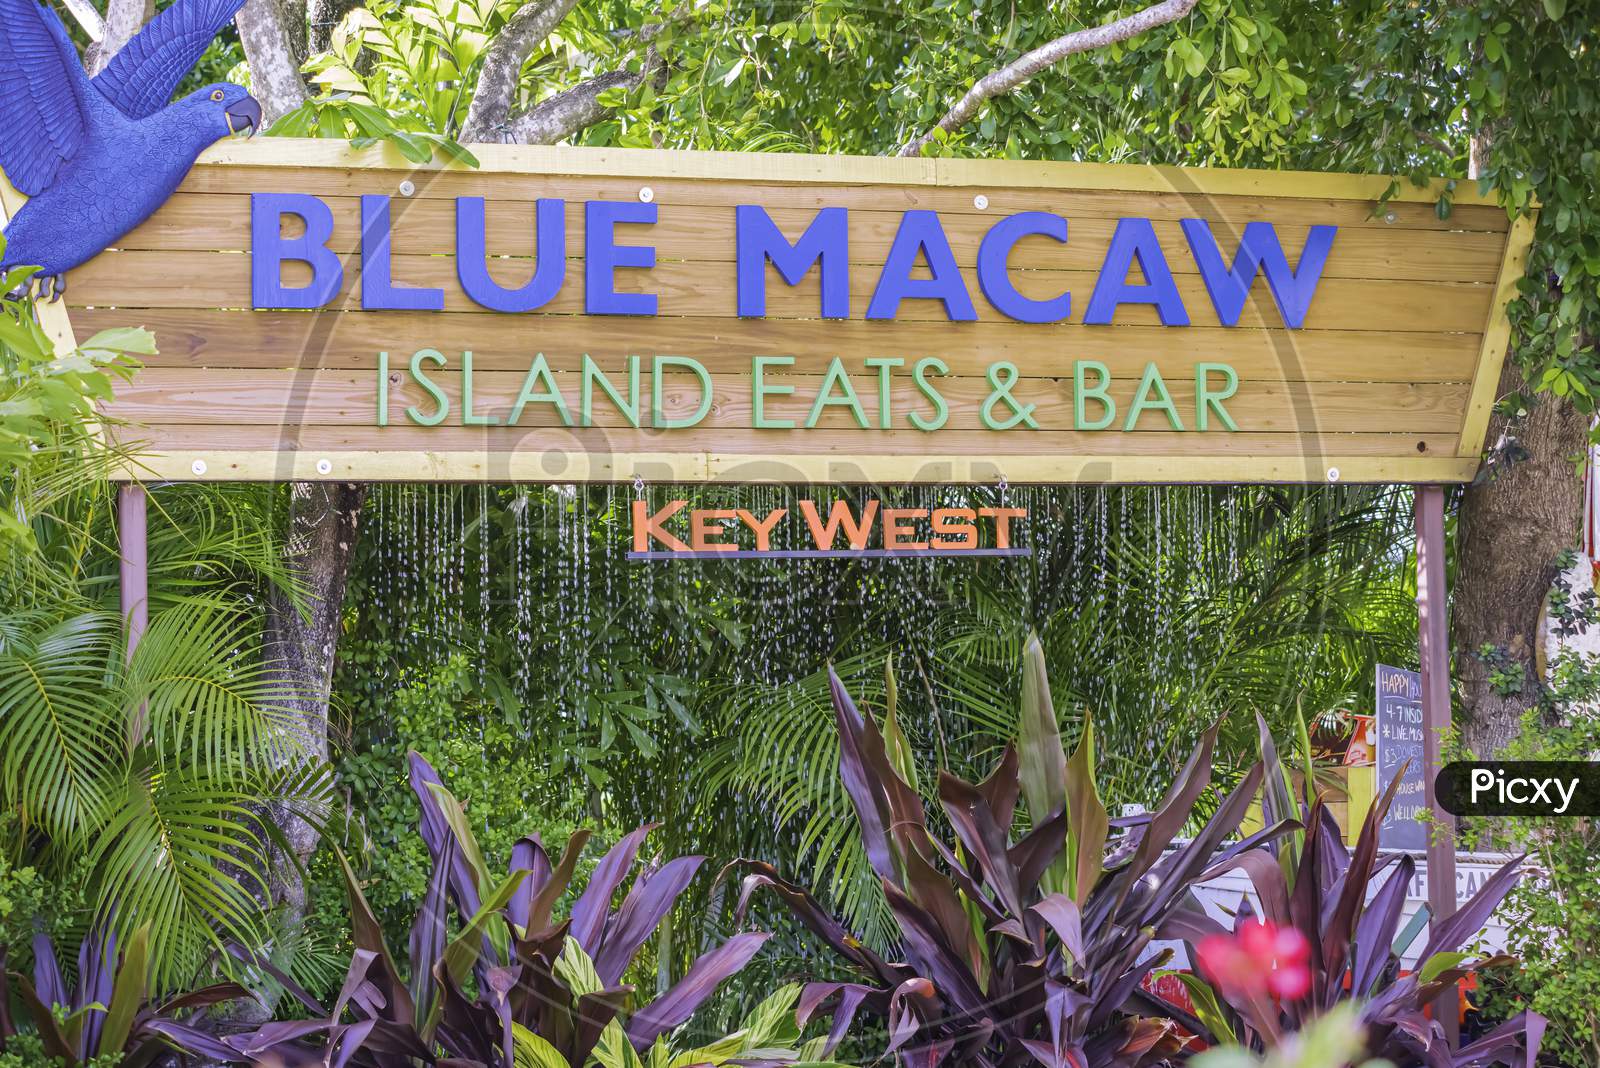 Key West Florida Usa 10/25/2016 The Blue Macaw Island Eats And Bar During Fantasy Fest 2016. Editorial use only